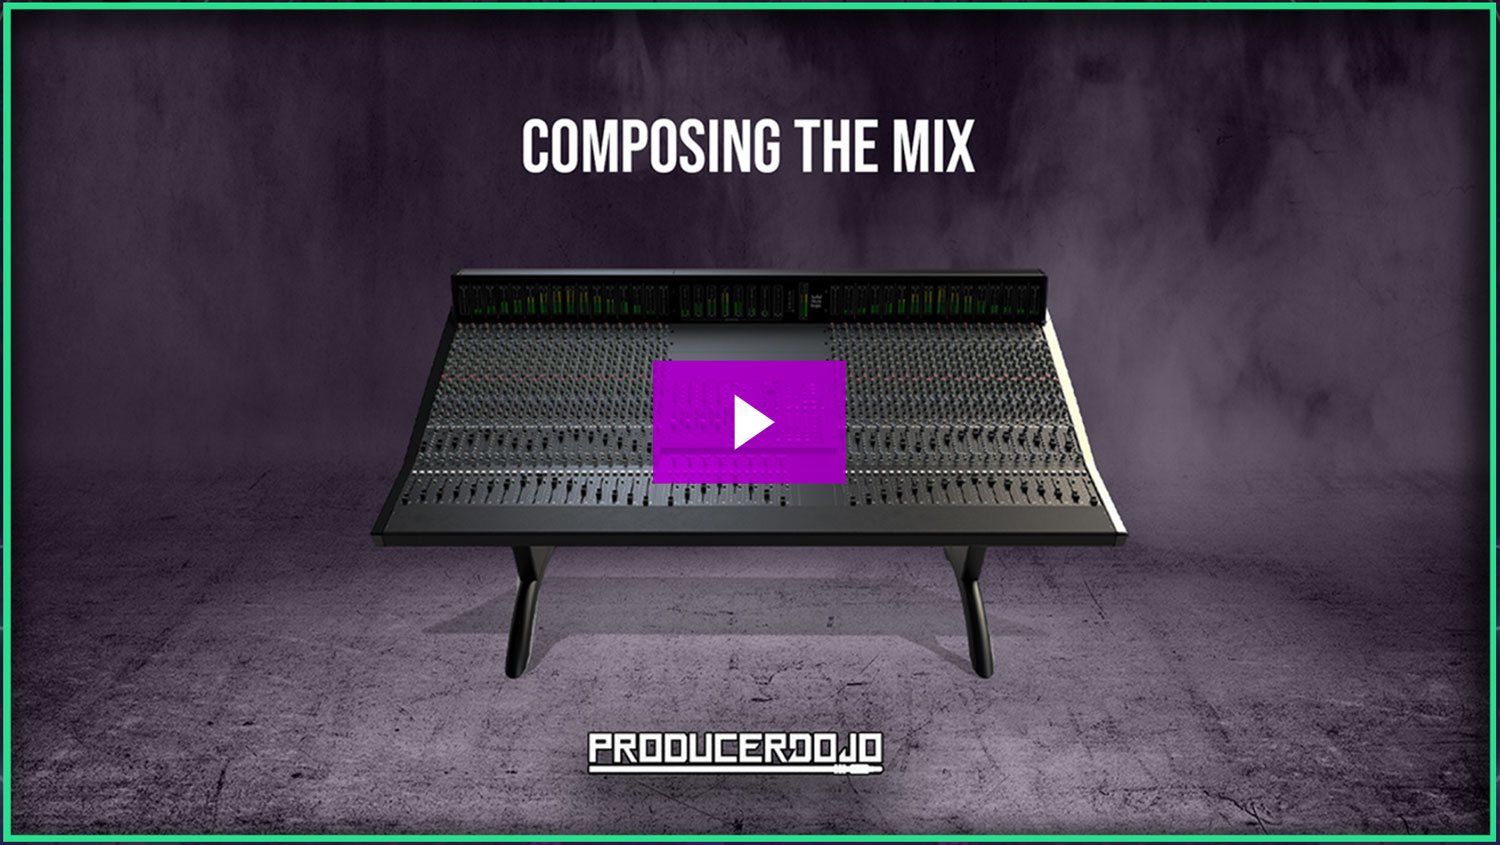 Discover How to Mix Your Music with Composing the Mix Workshop at Producer Dojo. Discover EDM Sample Packs For DJs and Music Producers on ProducerDJ!